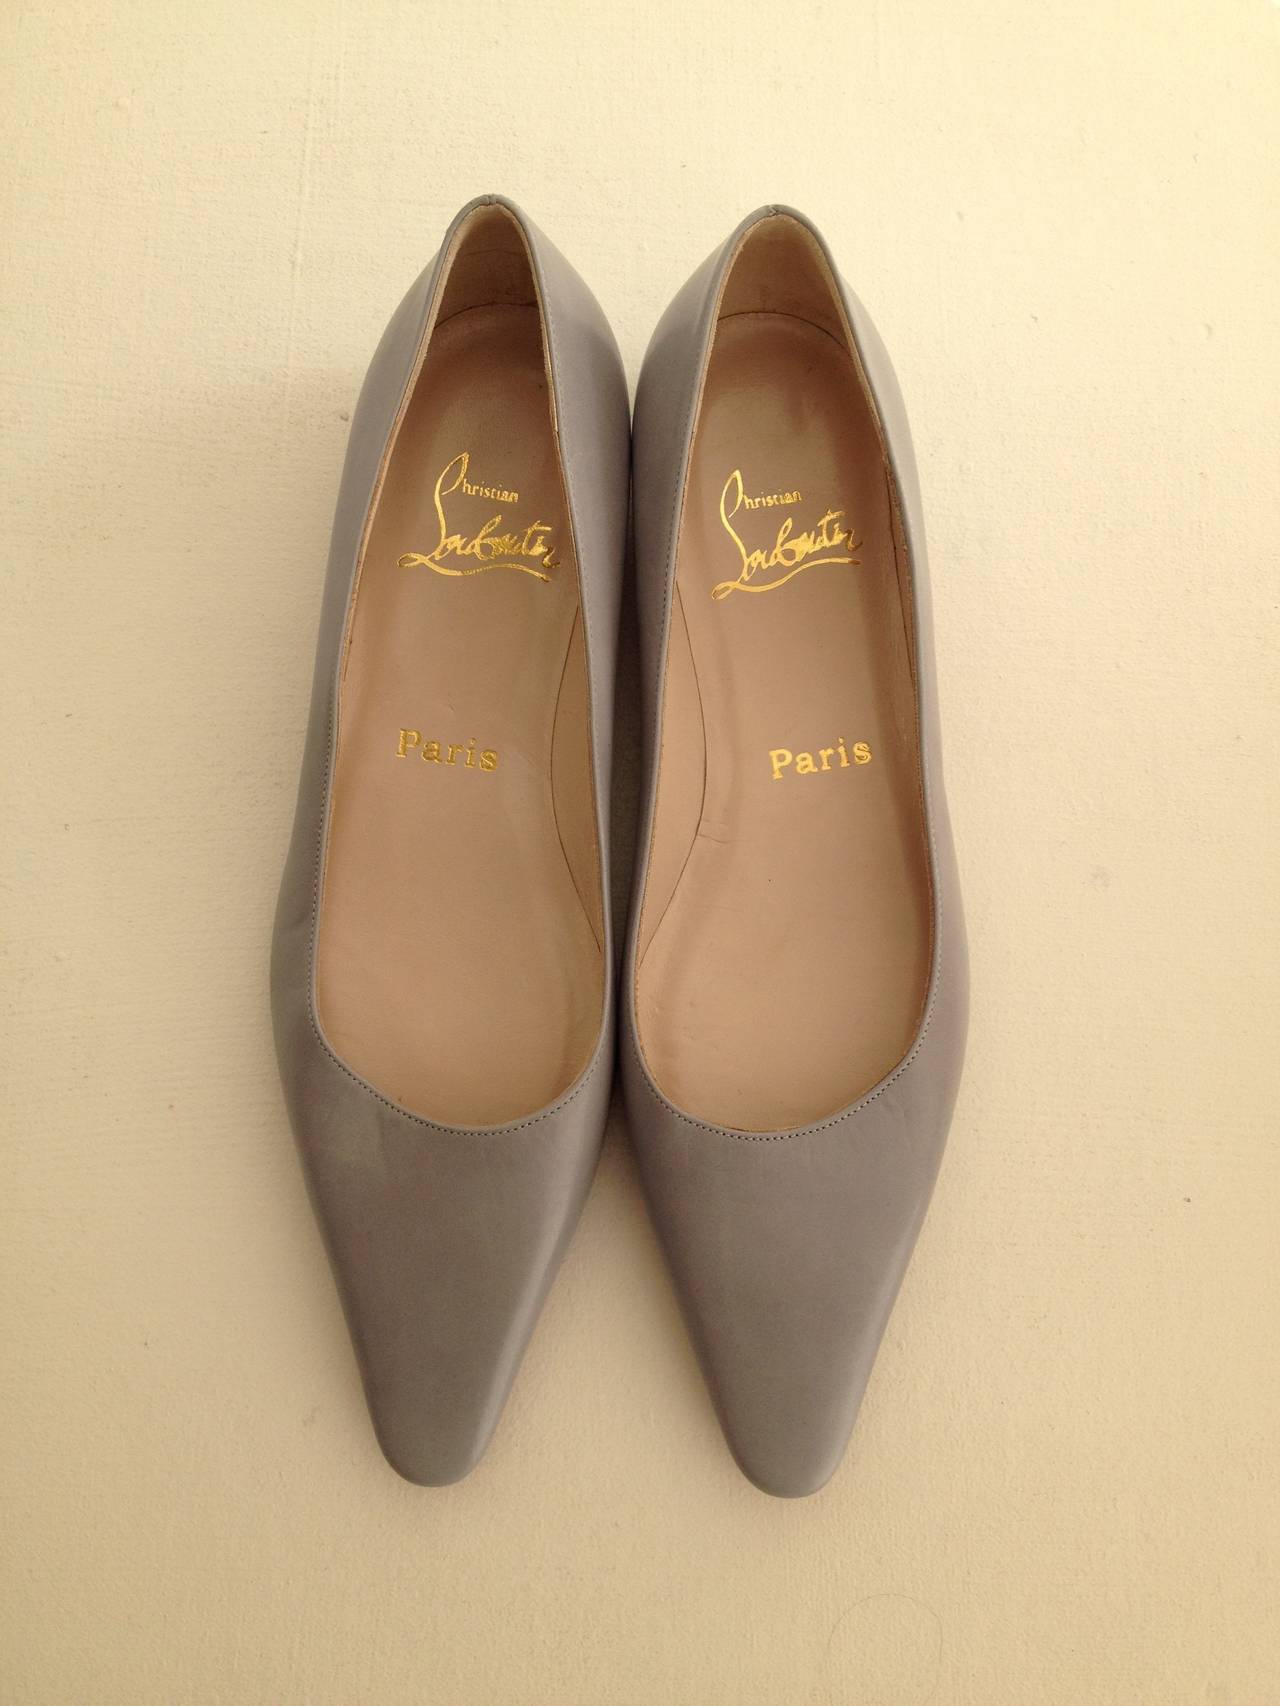 Feel fashion forward and supremely comfortable in these grey pointy toe flats by Christian Louboutin with a minimal 0.5 inch heel. Whether looking to make an effortless transition from day to night, or simply need an amazing new flat to wear with